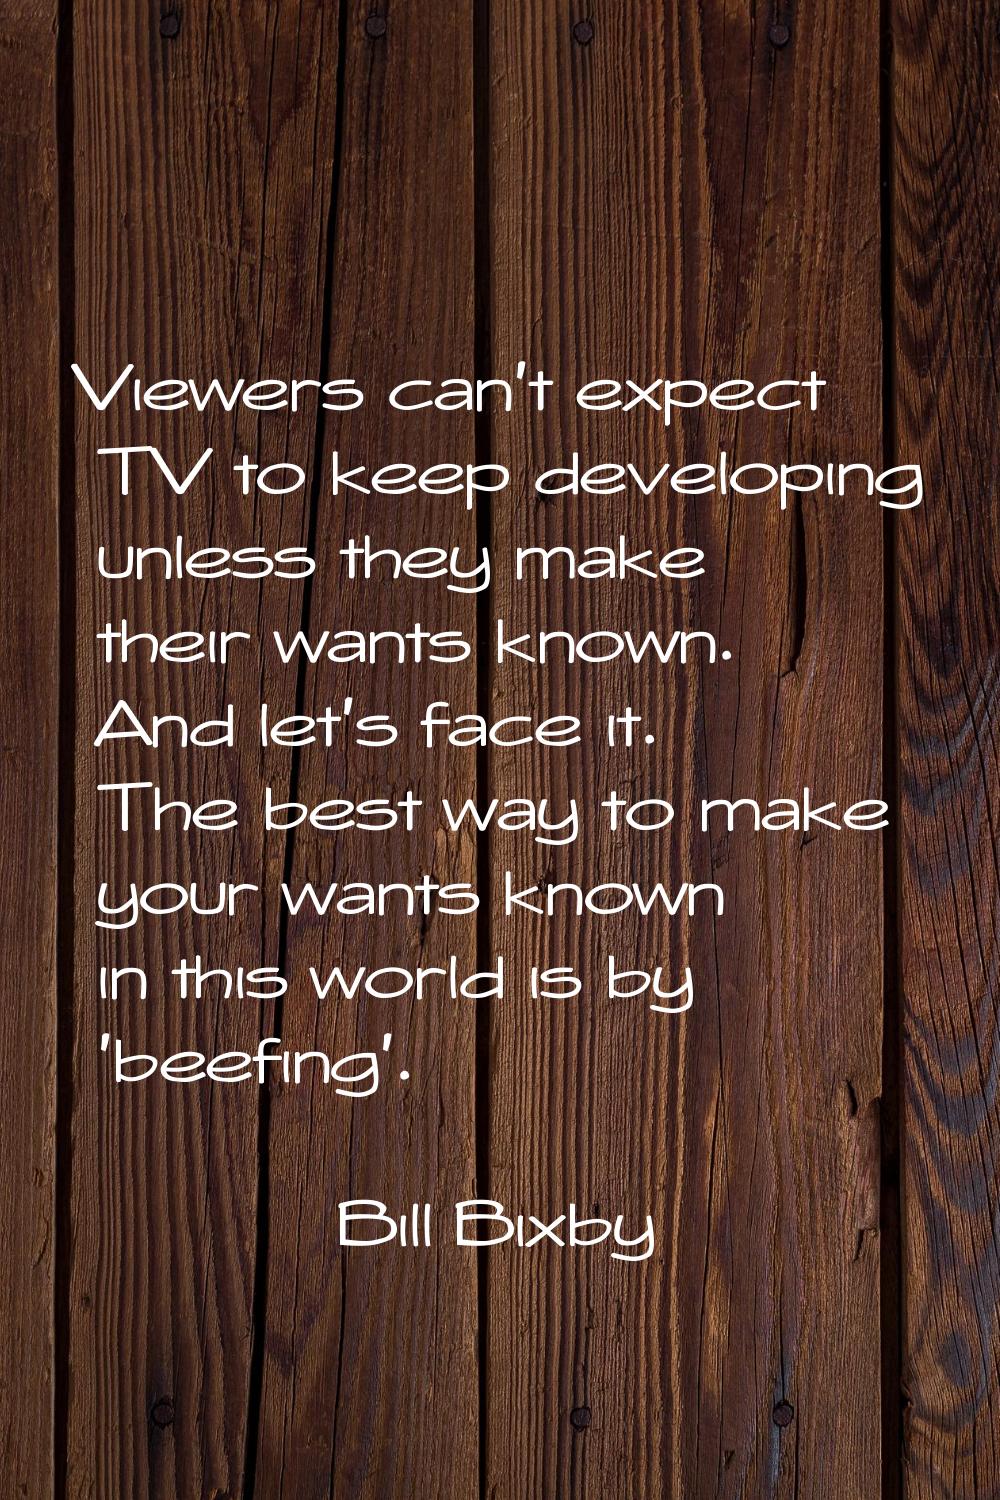 Viewers can't expect TV to keep developing unless they make their wants known. And let's face it. T